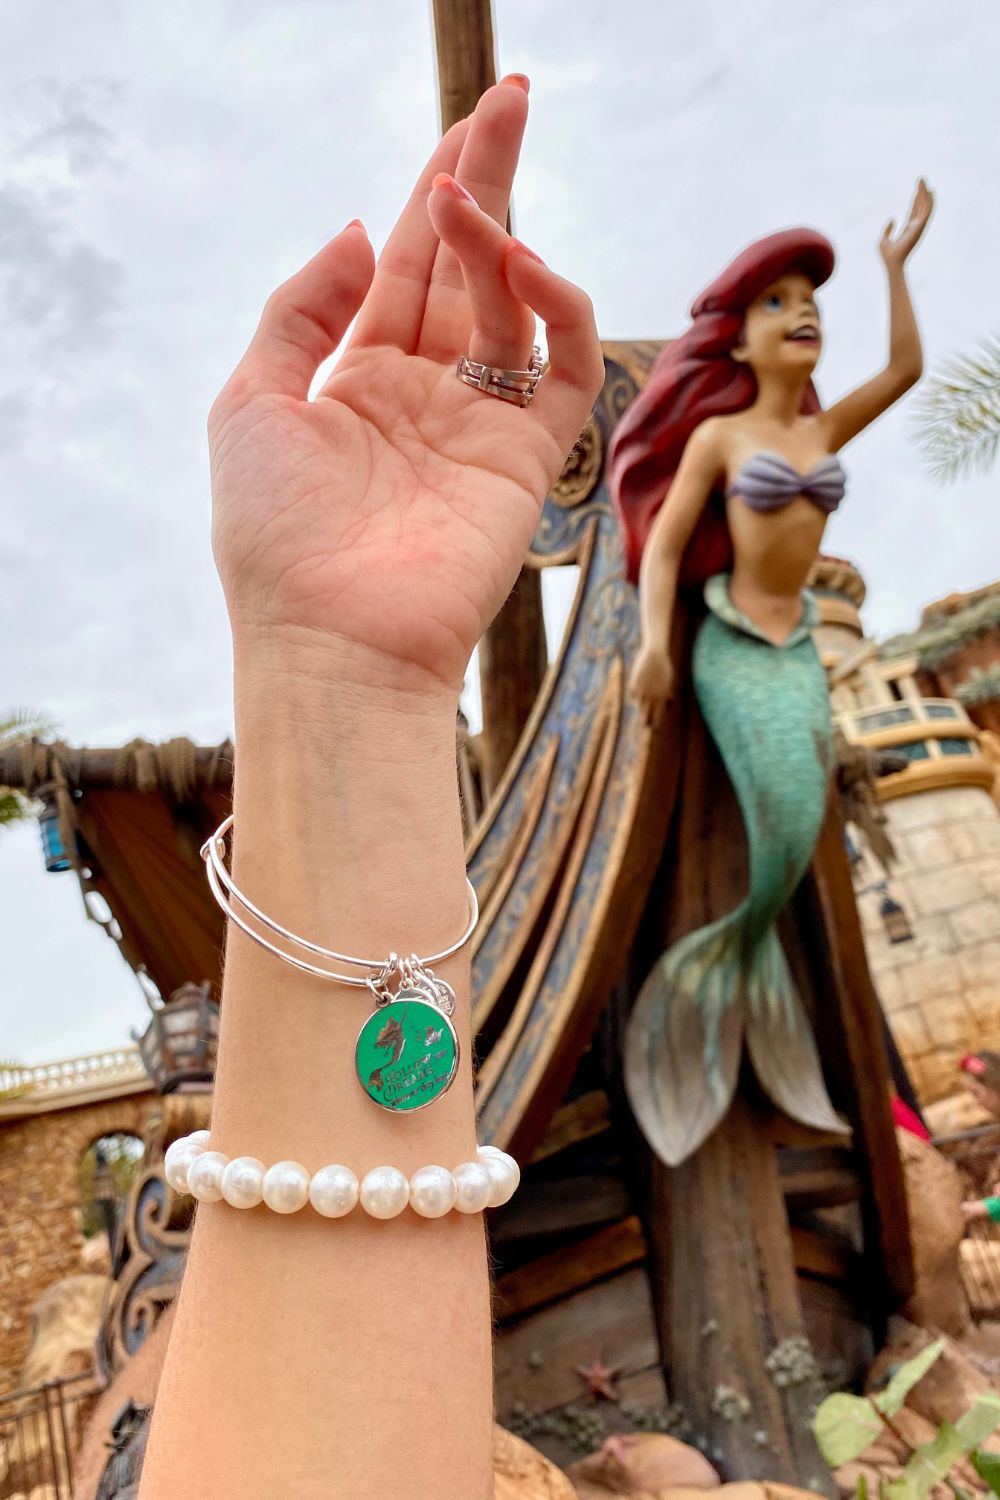 Ariel Bracelet by Alex and Ani - Worn by Mermaid Jules in front of the little mermaid ride at Walt Disney World.